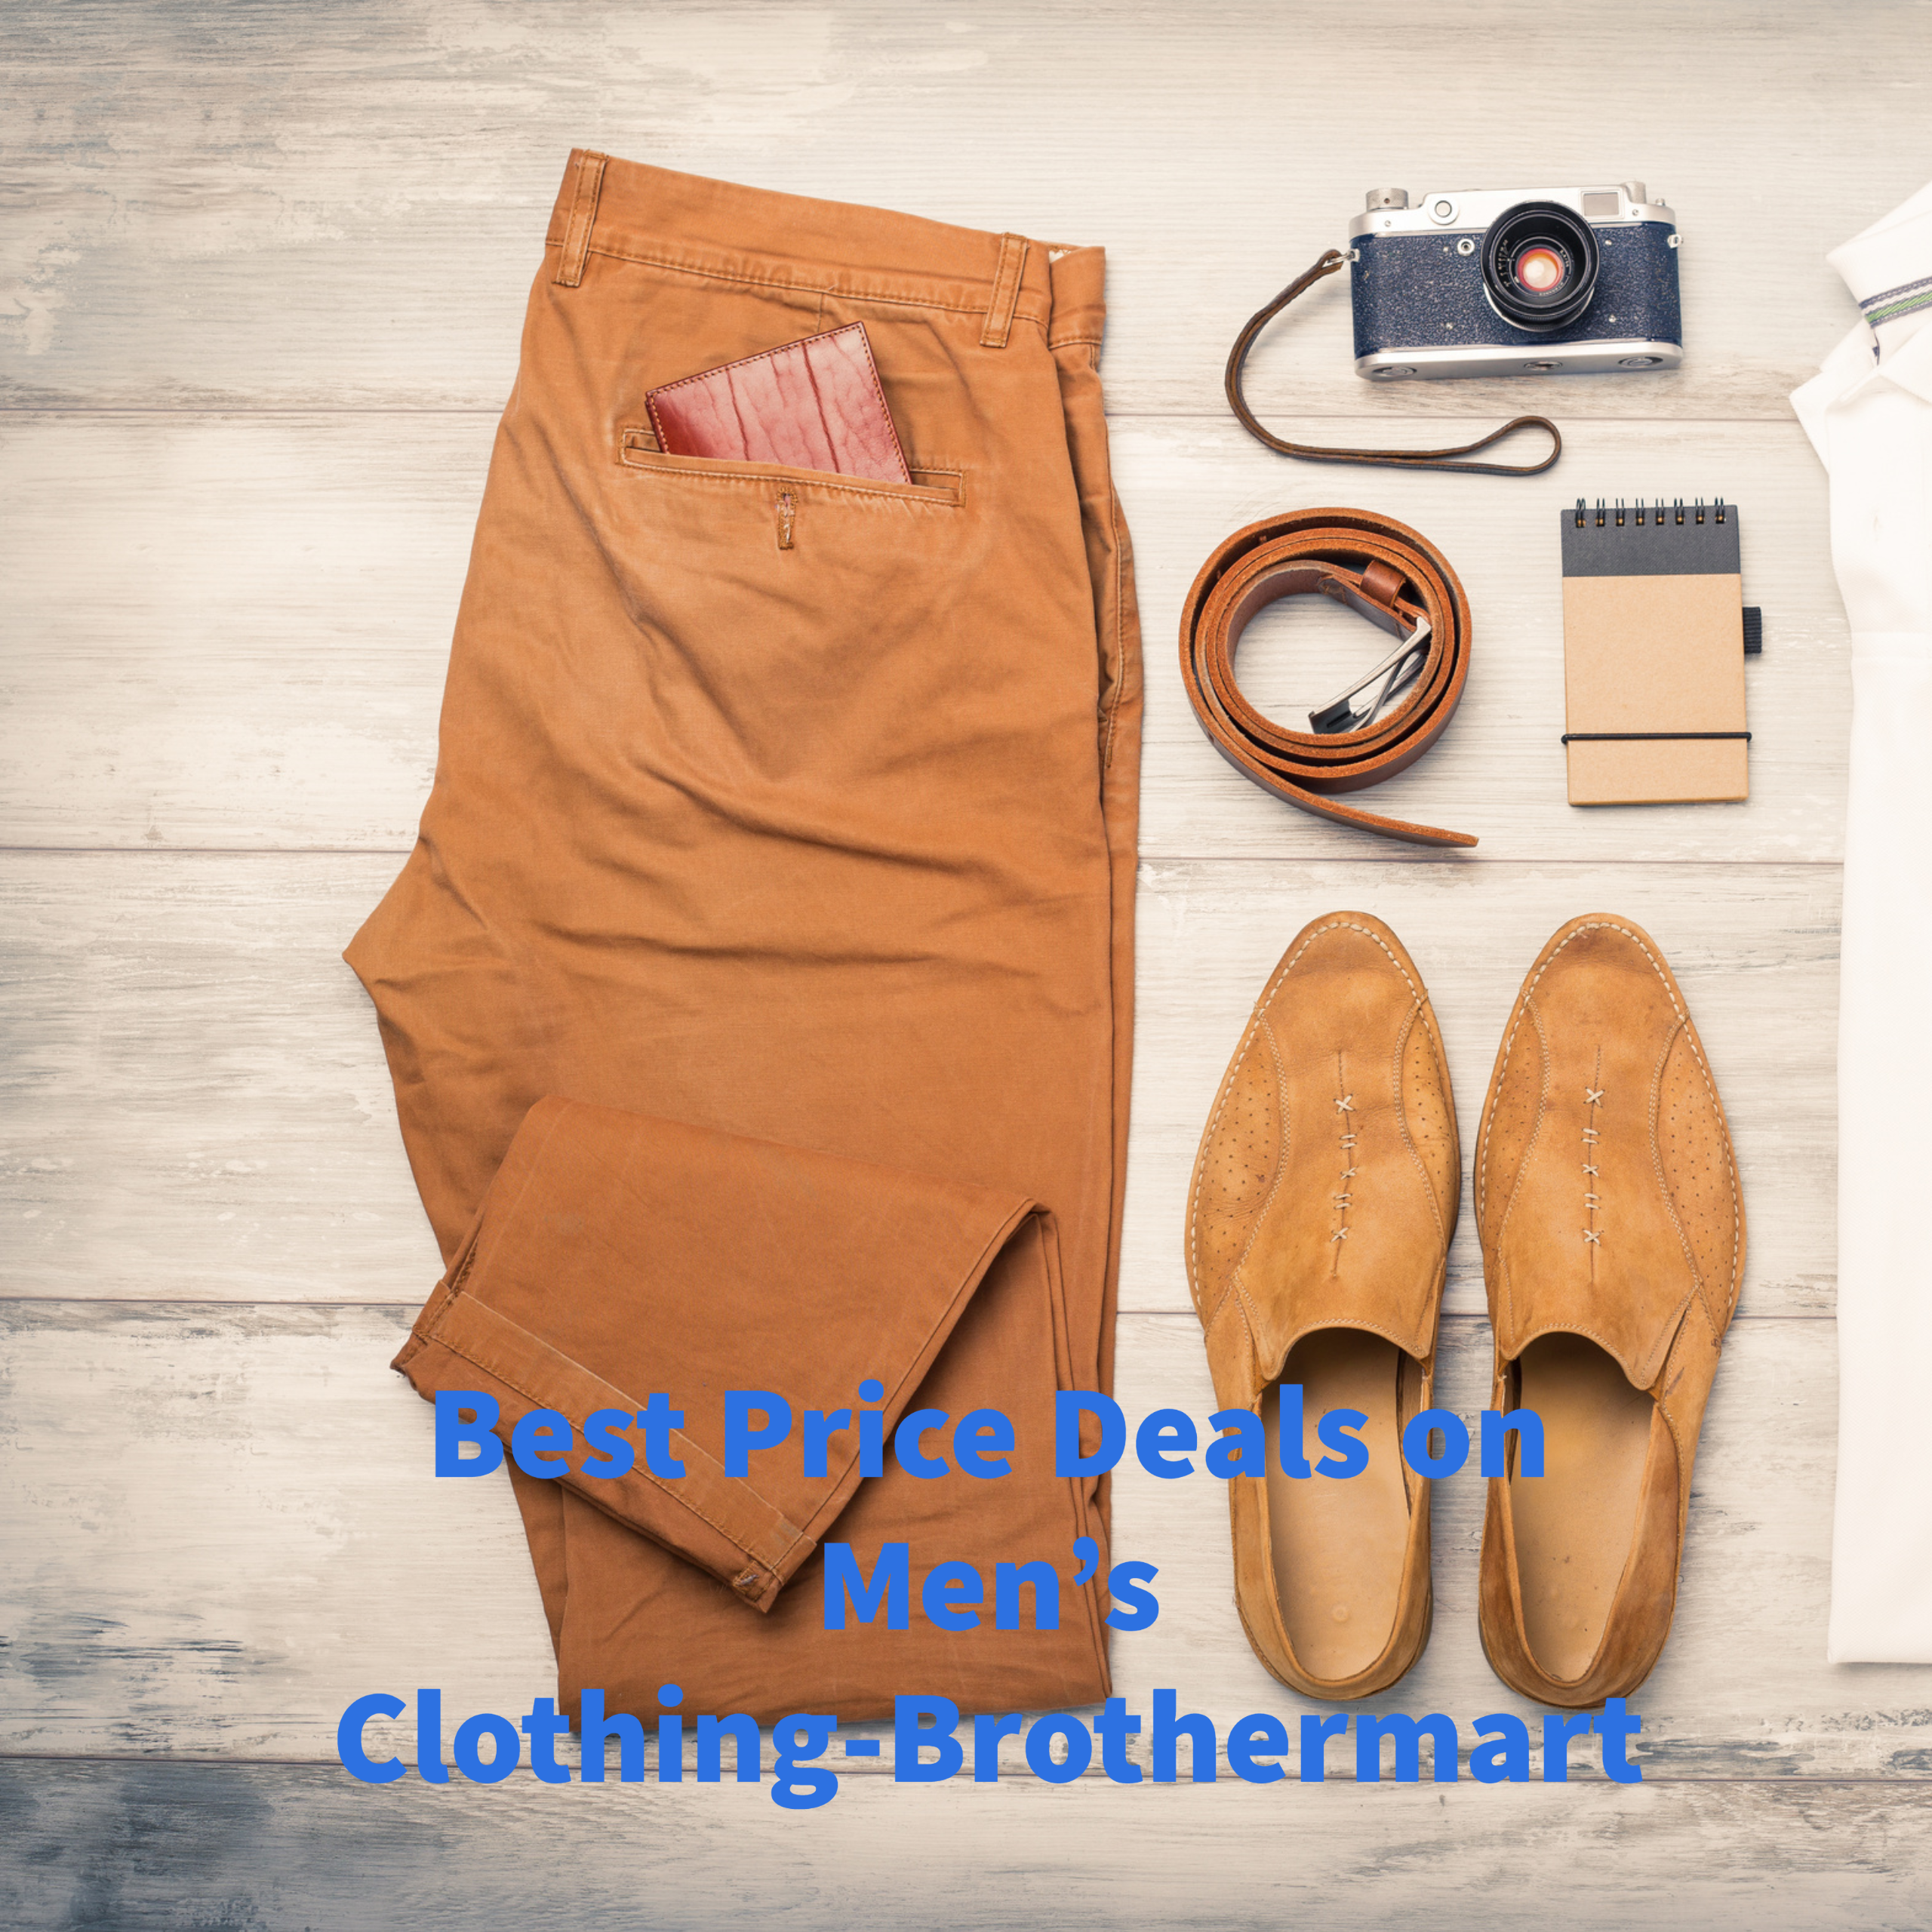 Shop men's clothing in Nepal at best price from brothermart